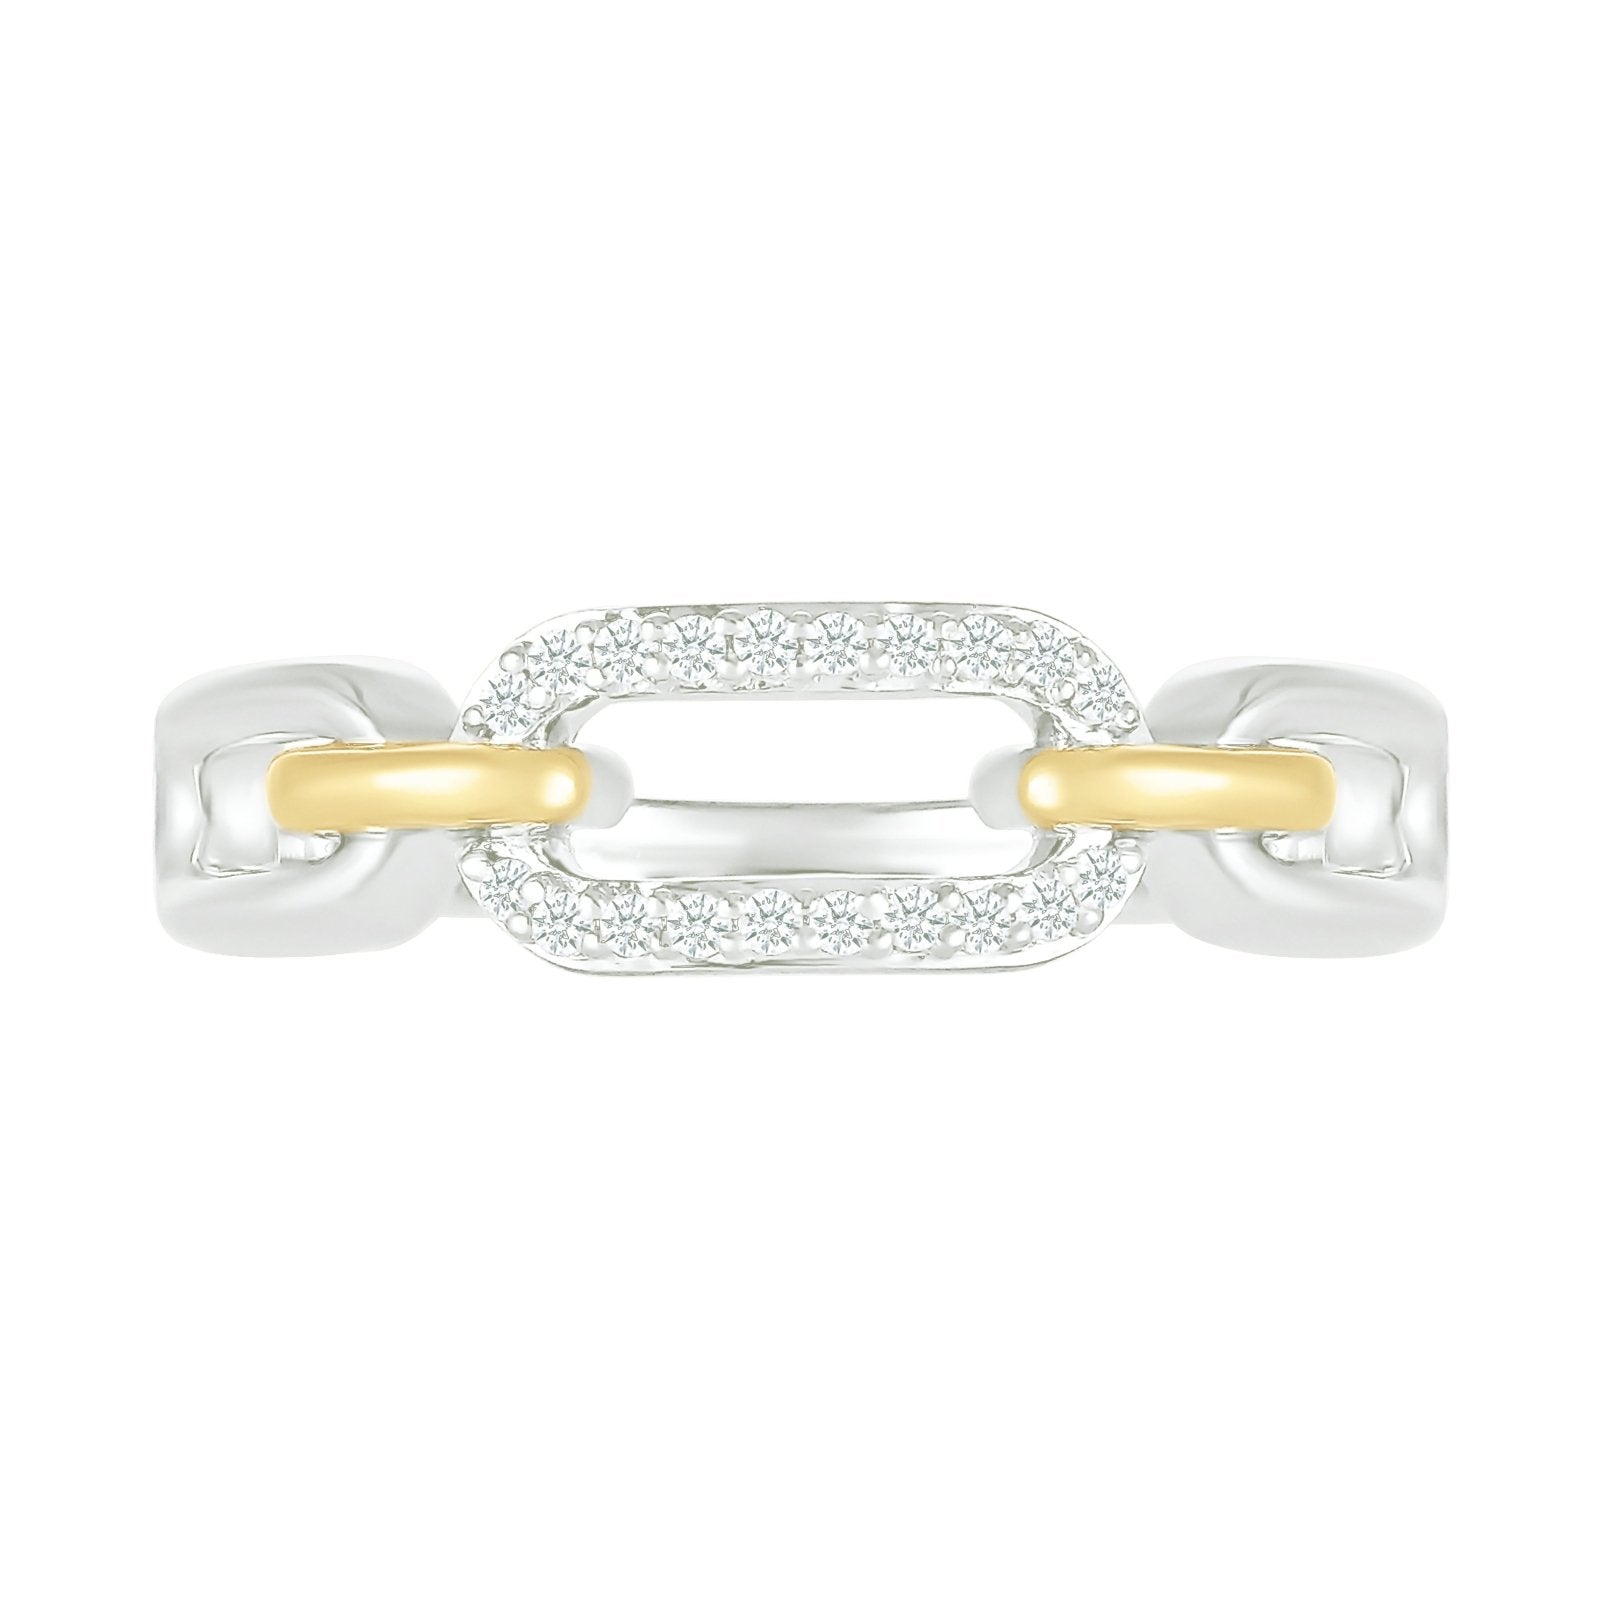 Interlocking Gold and Diamond Paperclip Ring Rings Estella Collection #product_description# 32745 925 Diamond Made to Order #tag4# #tag5# #tag6# #tag7# #tag8# #tag9# #tag10#